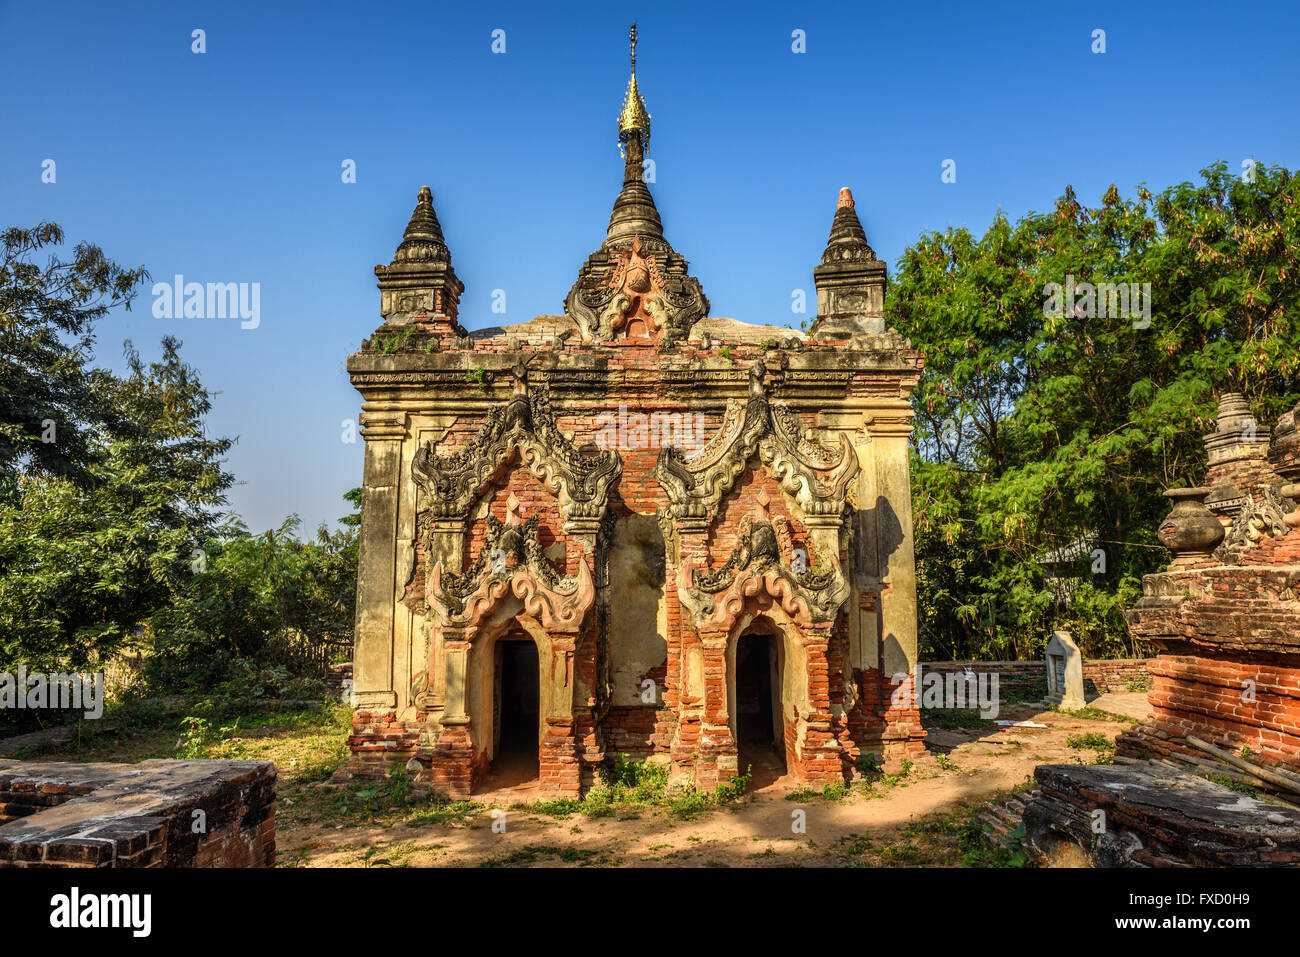 One of many ruined temples in the ancient city and former 14th to 19th century capital of Ava, also called Inwa. Stock Photo